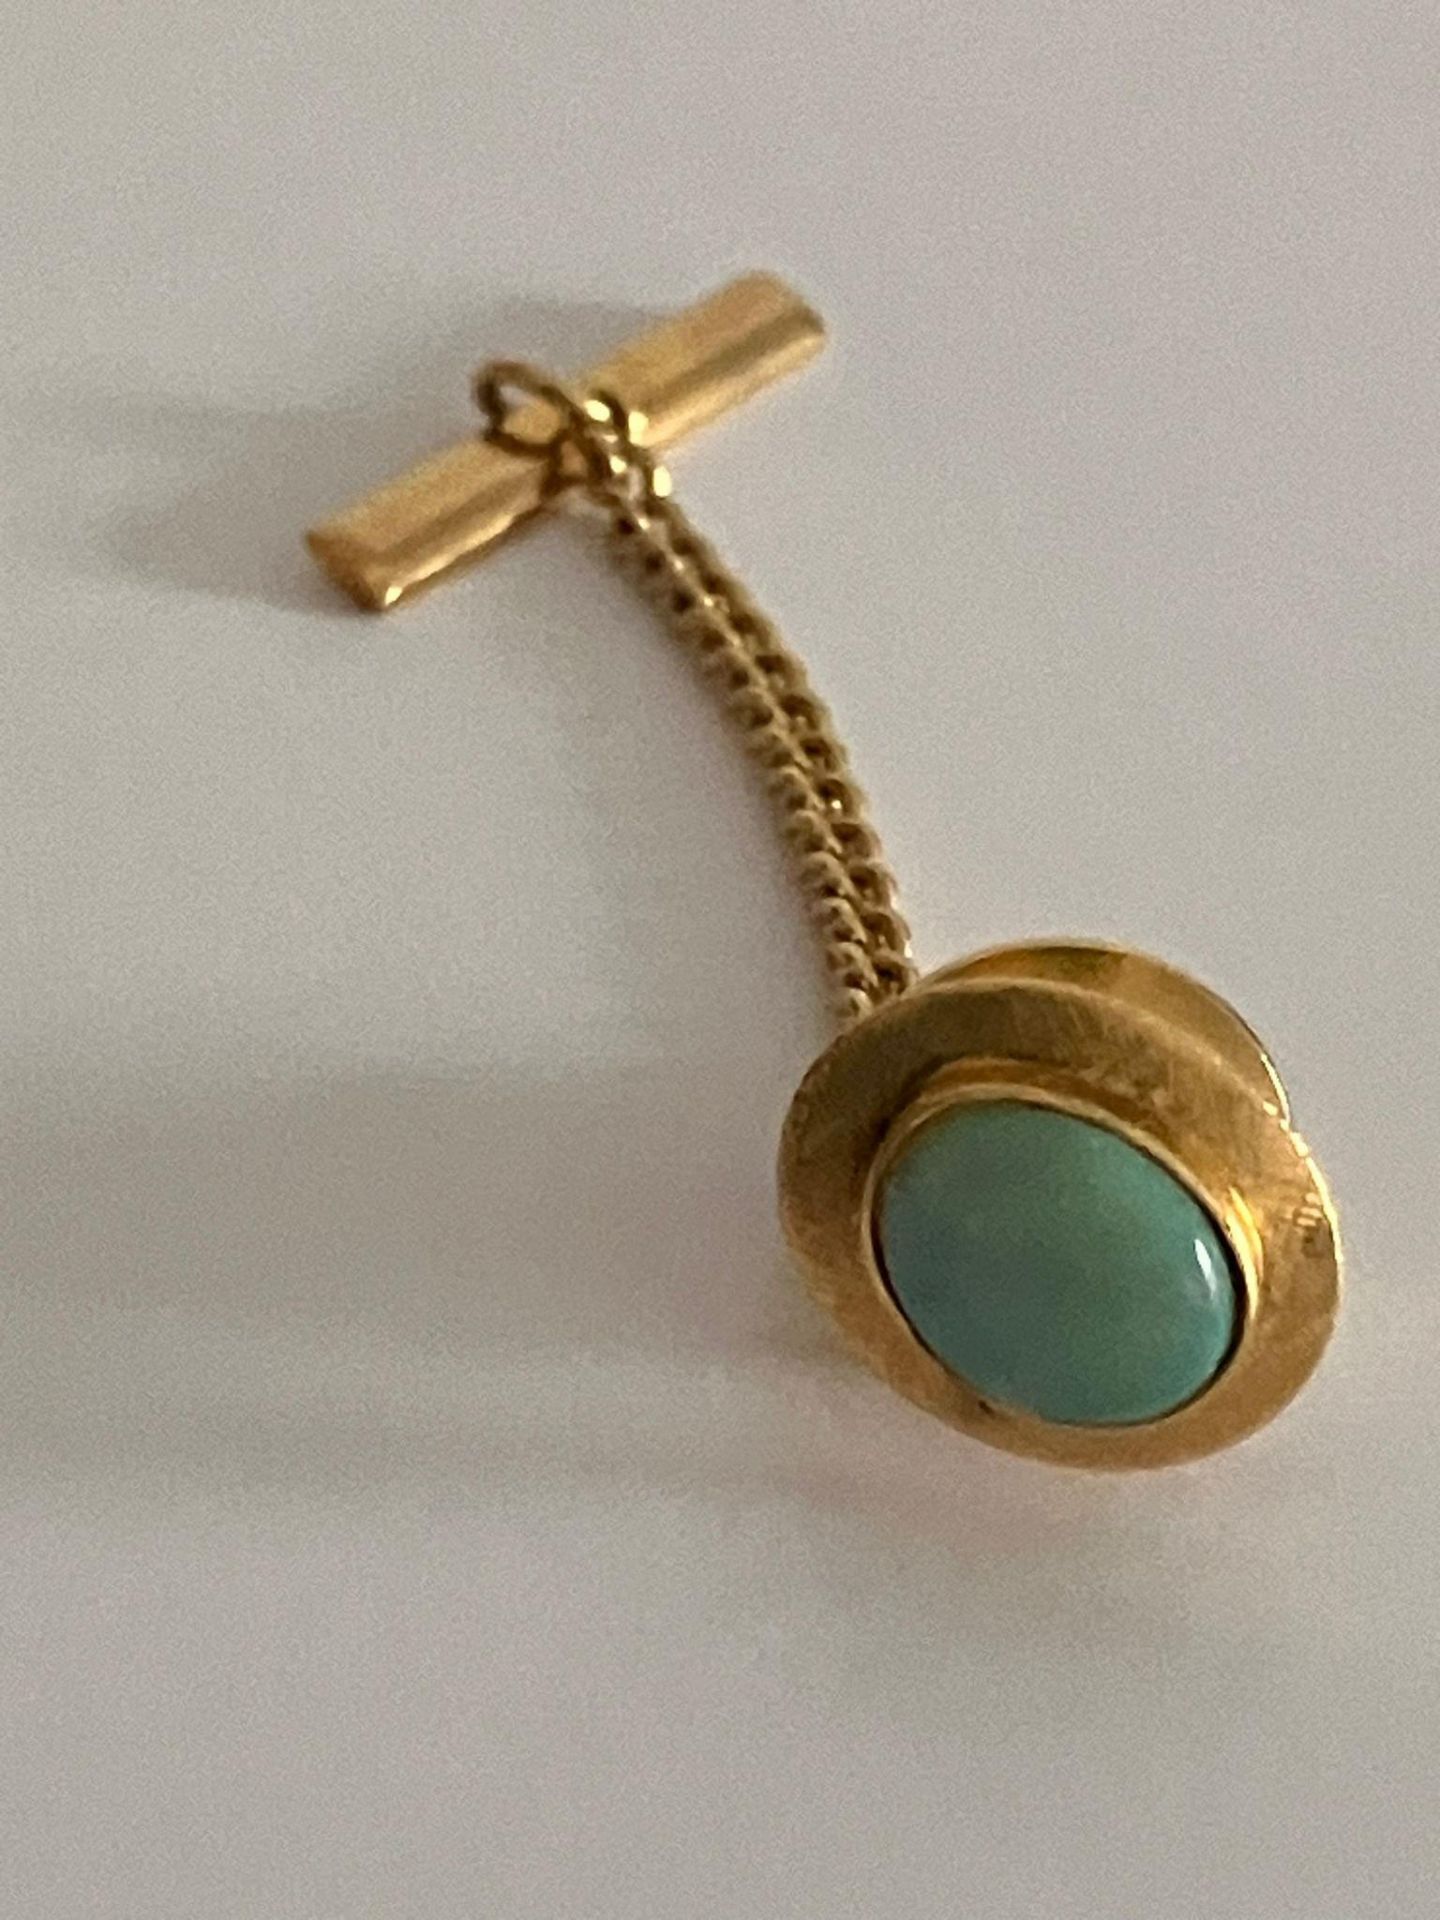 14 carat GOLD TIE PIN set with OPAL. Please note chain is gilt not gold. - Image 2 of 3